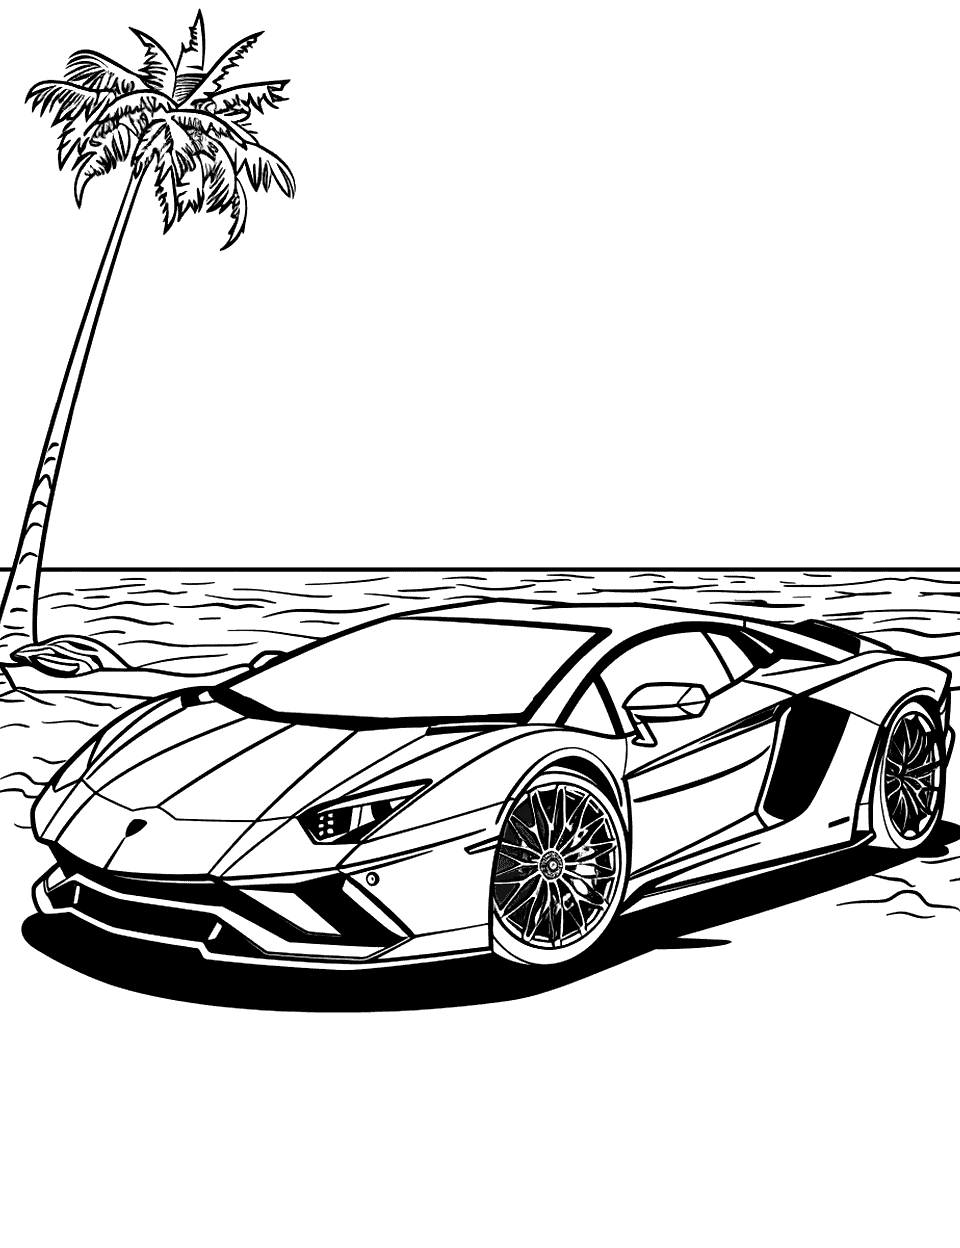 Beachside Lamborghini Coloring Page - A Lamborghini parked with the beach in the background.